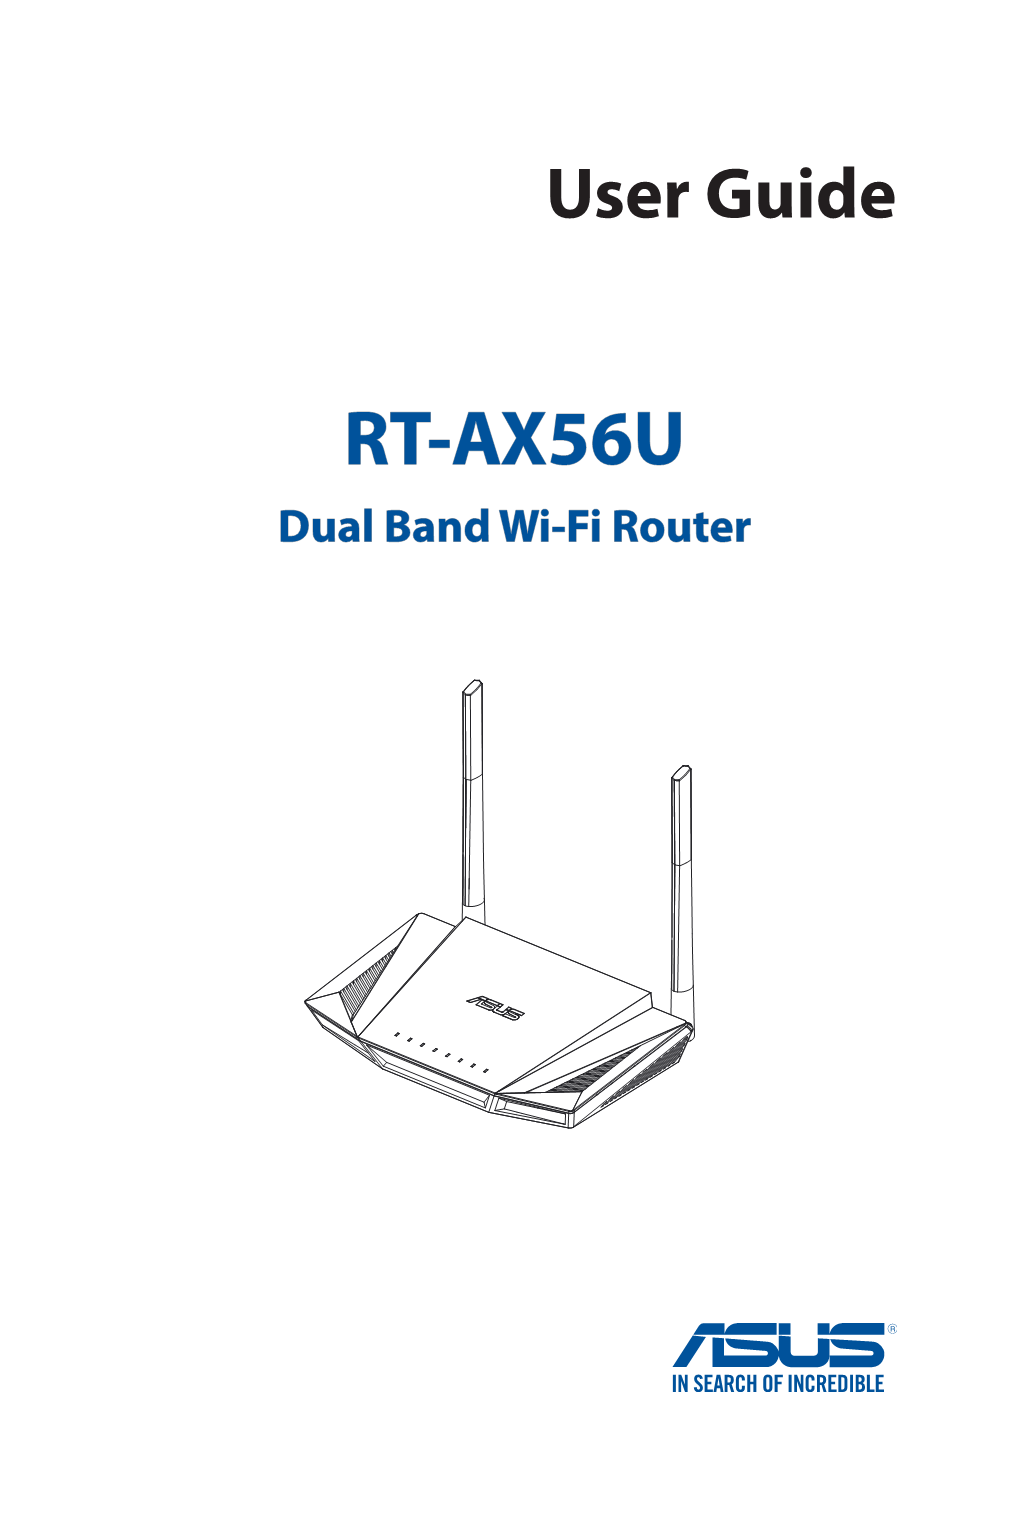 RT-AX56U Dual Band Wi-Fi Router E16832 First Edition June 2020